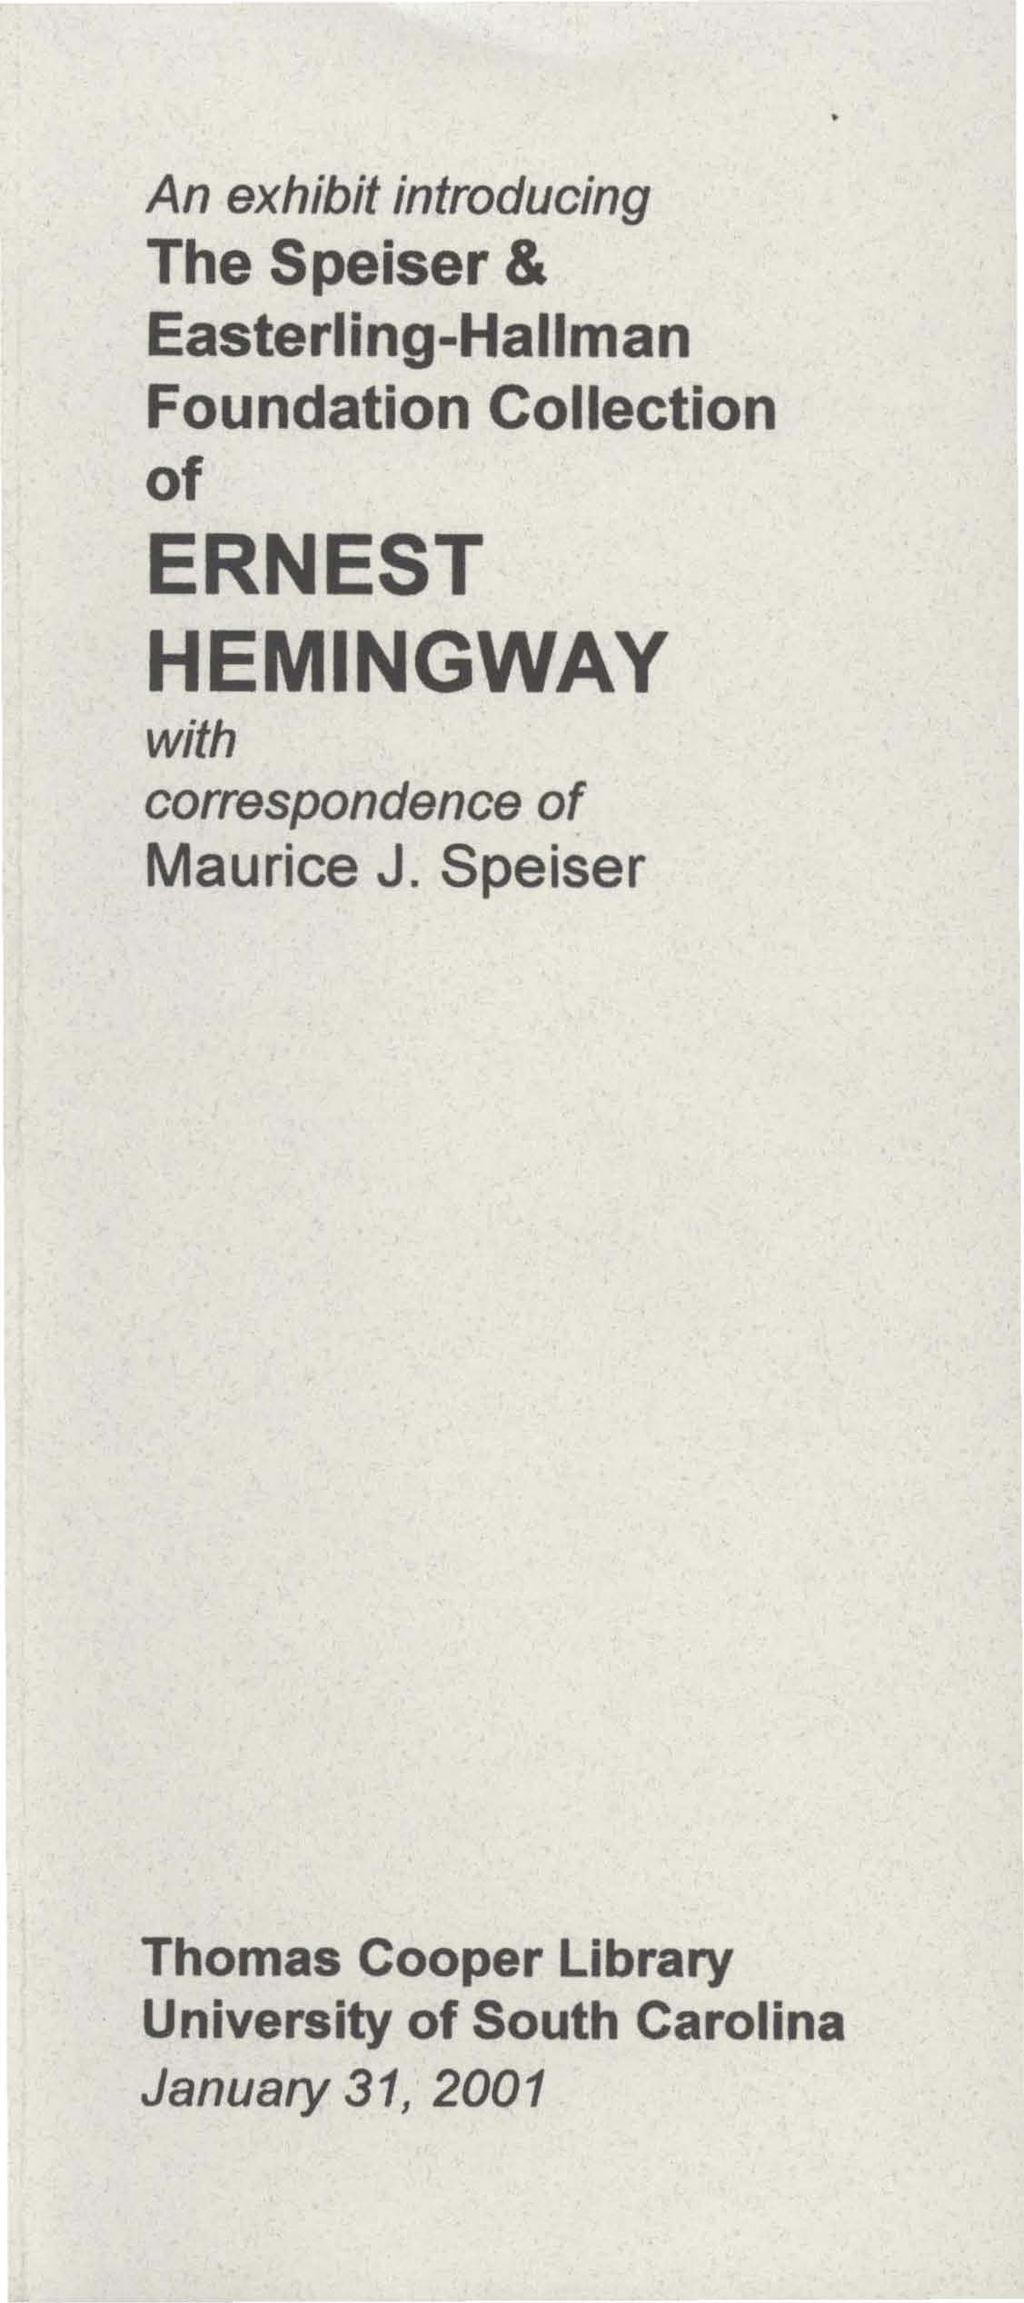 An exhibit introducing The Speiser & Easterling-Hallman Foundation Collection of ERNEST HEMINGWAY with